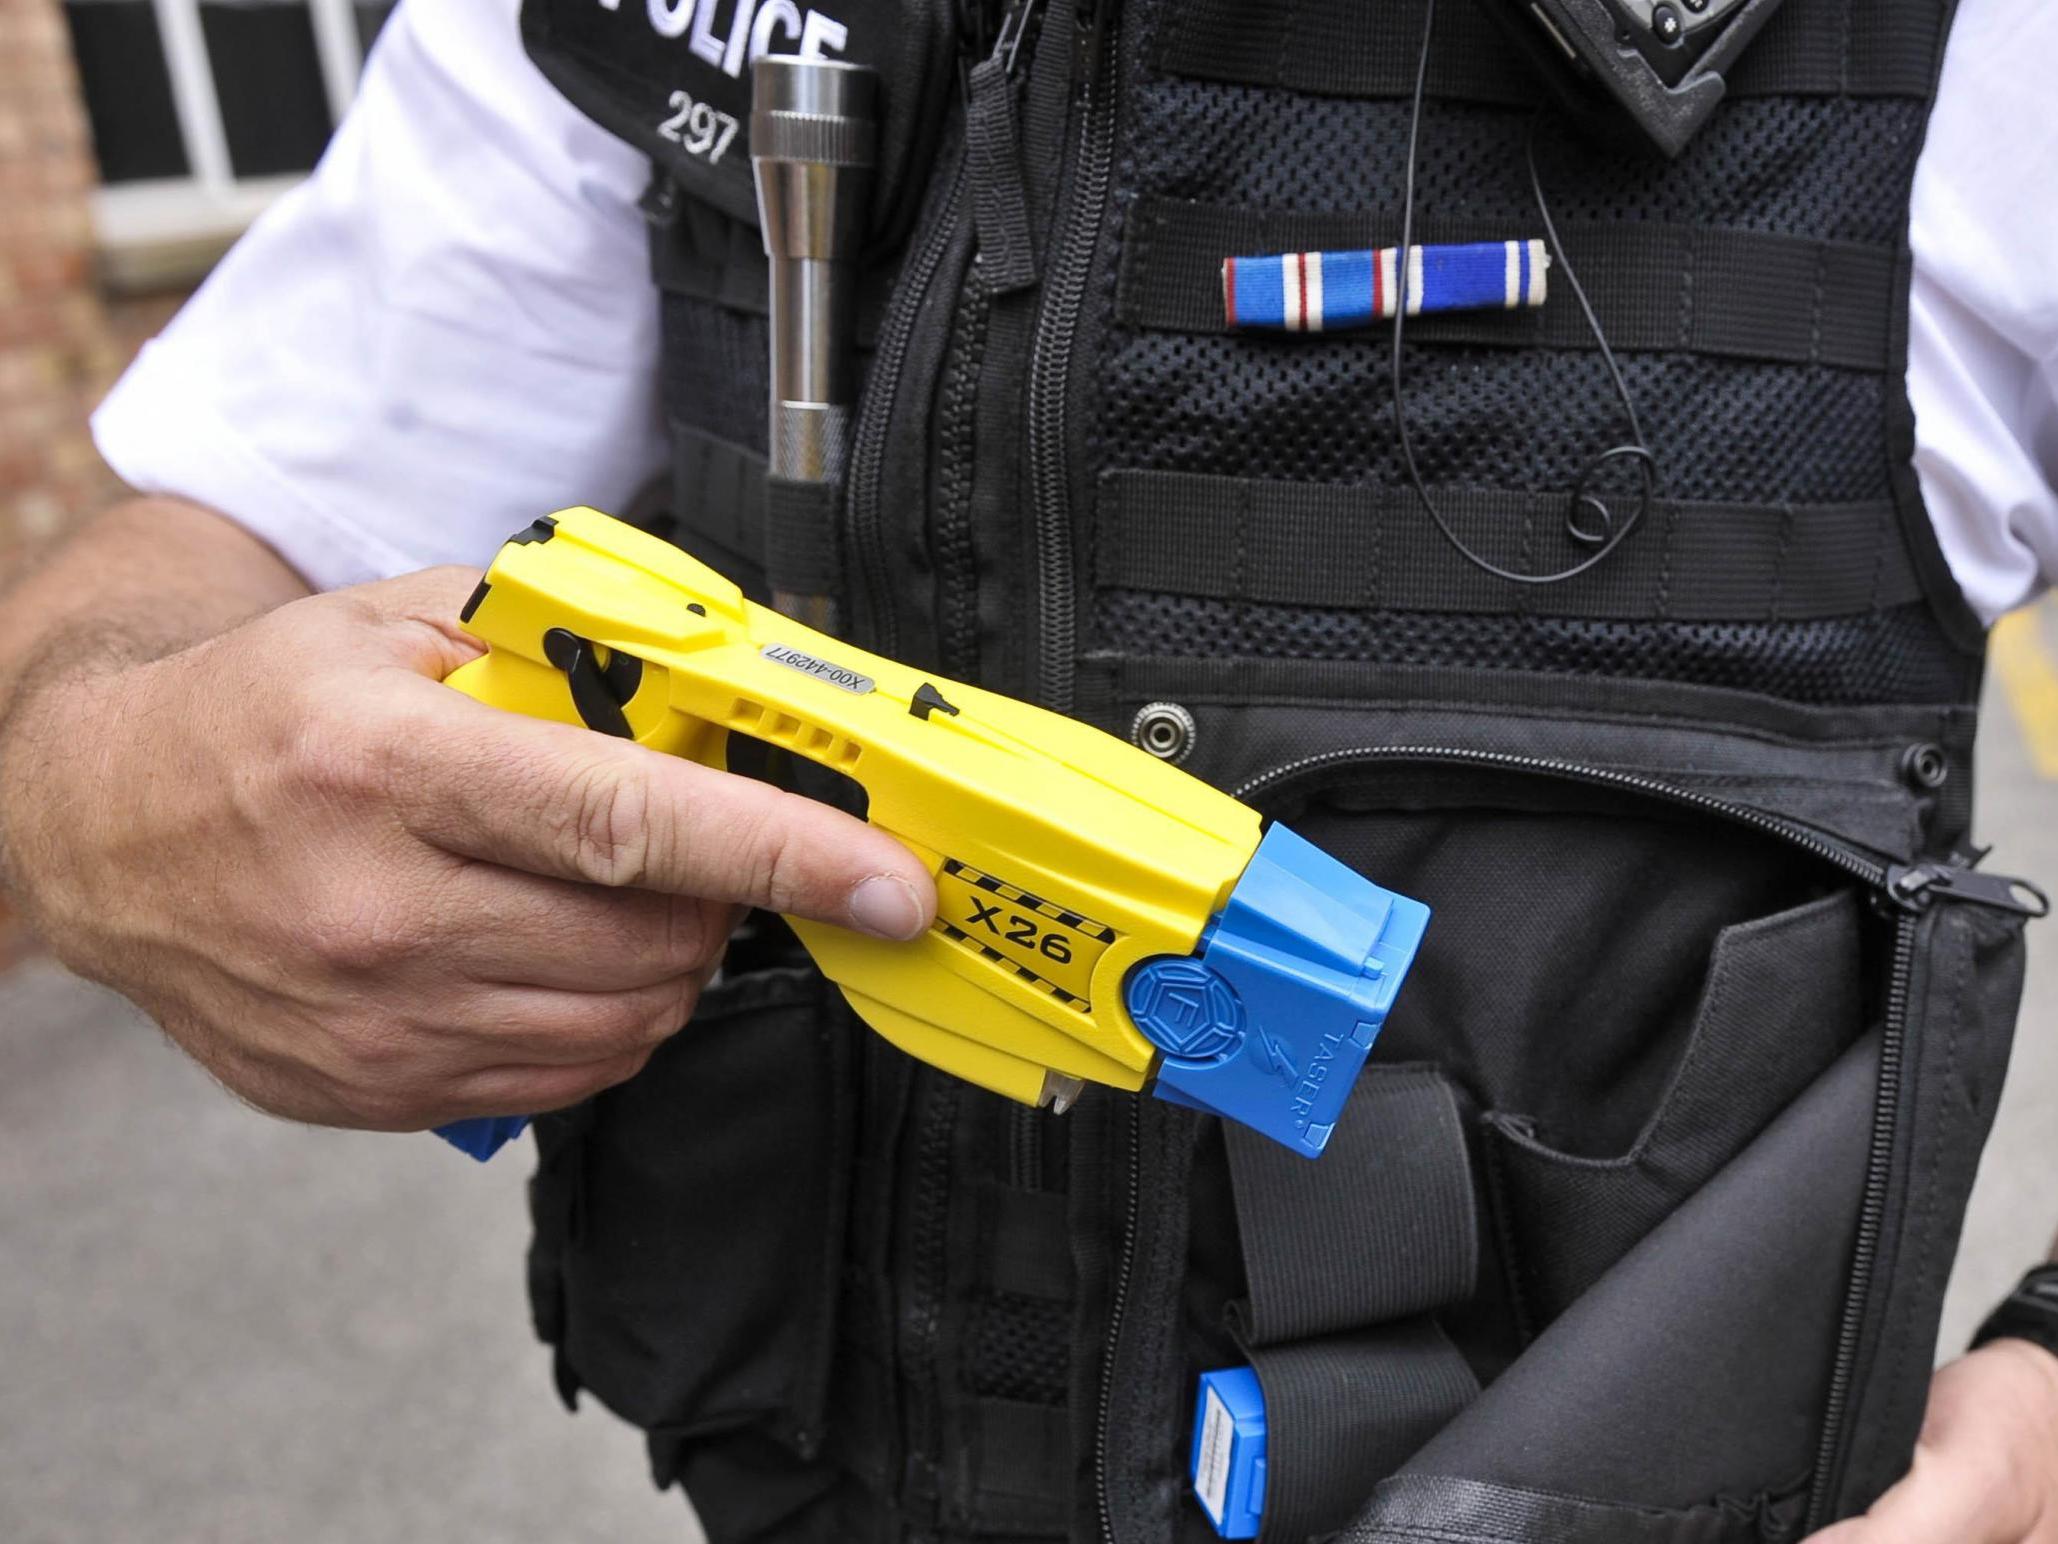 The Taser 7 was found to be less accurate in some tests than the older X26 model (pictured)